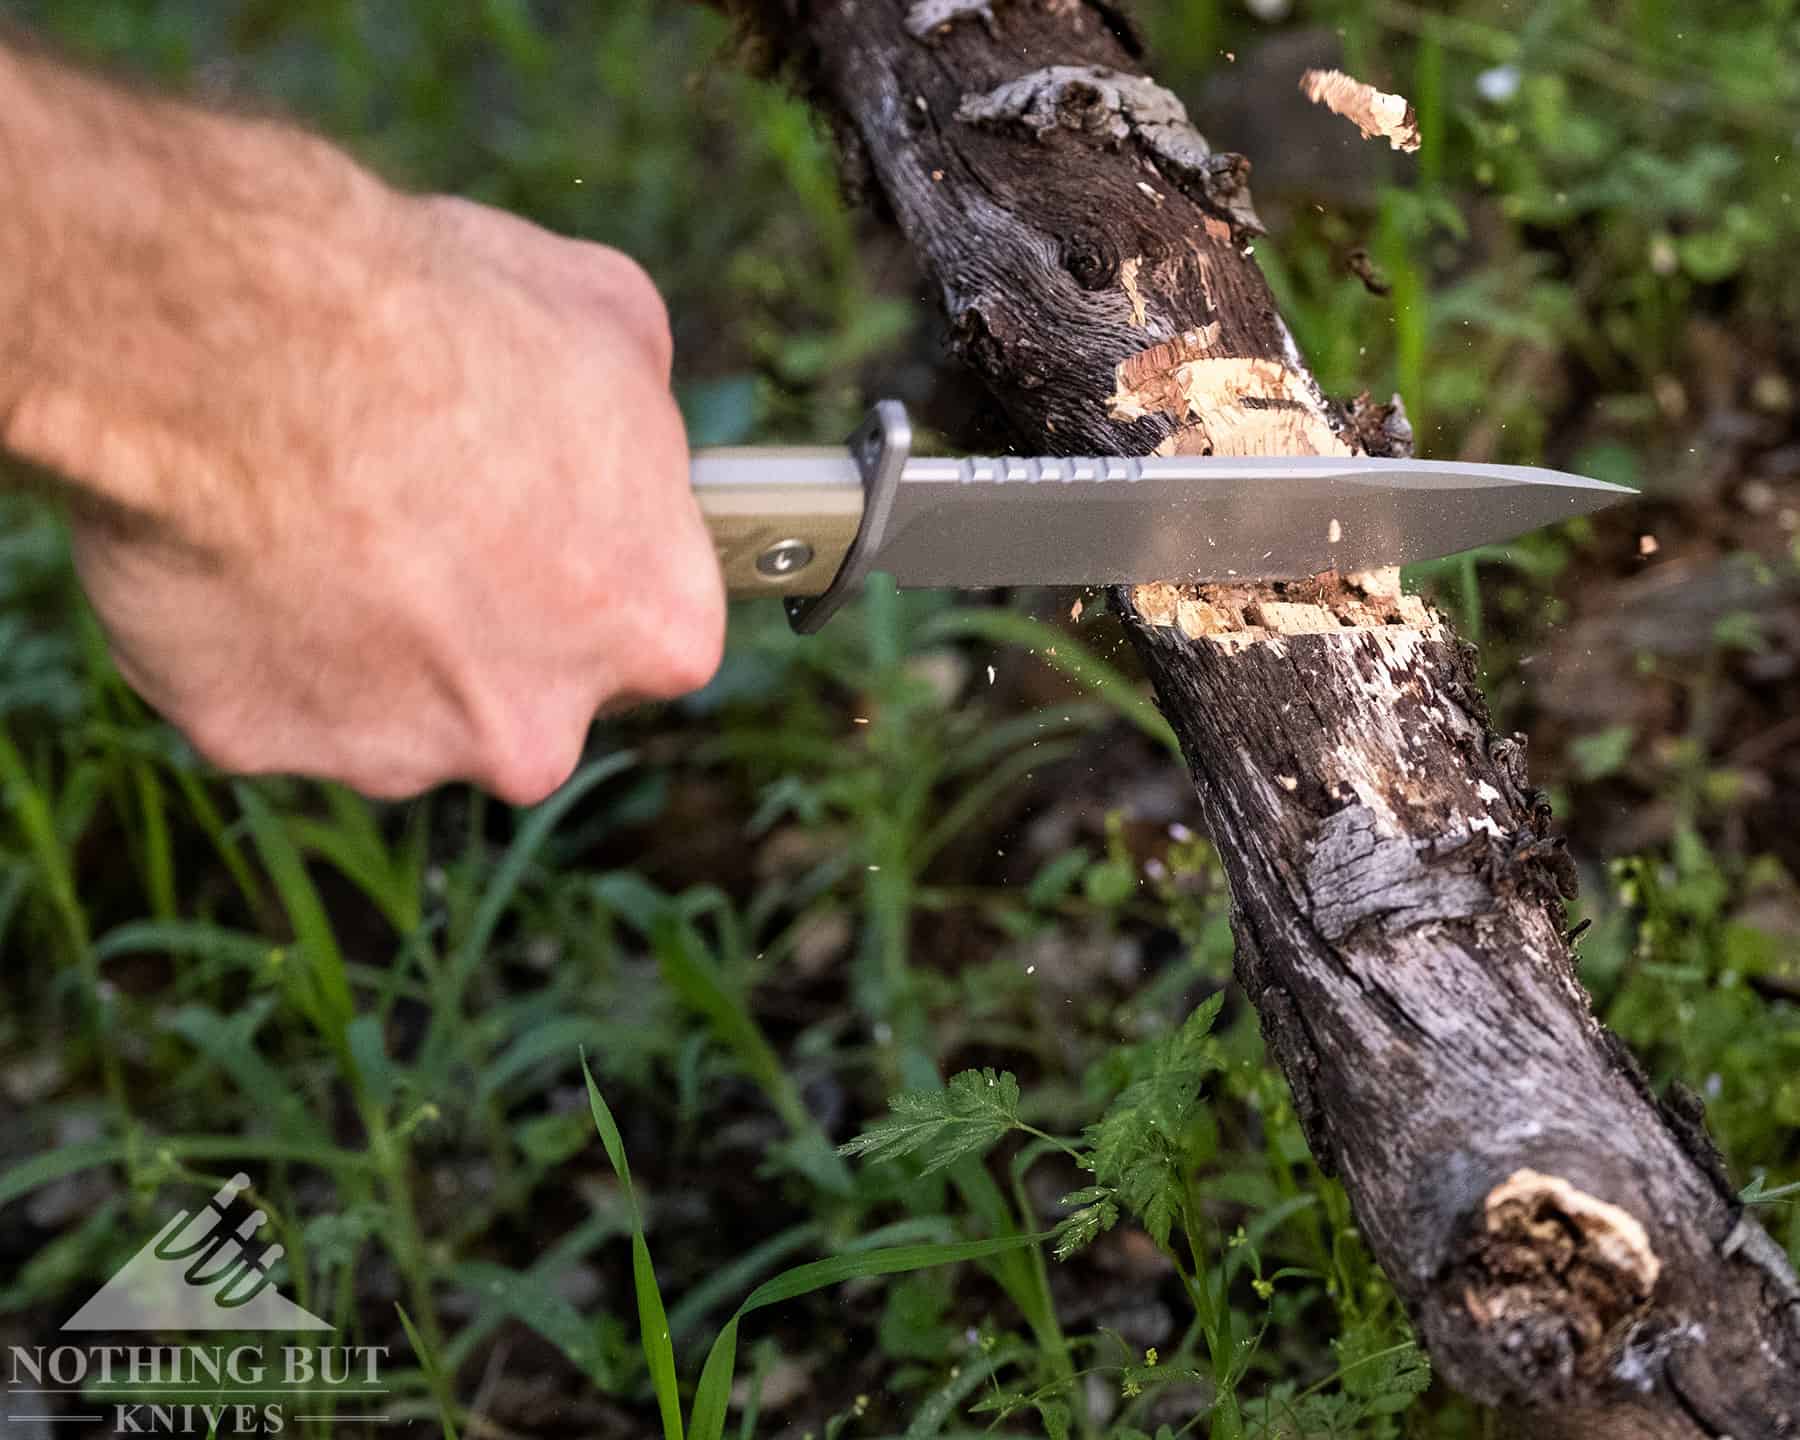 The good balance and easy grip handle of the Zero Tolerance 0006 make is a great chopping knife.